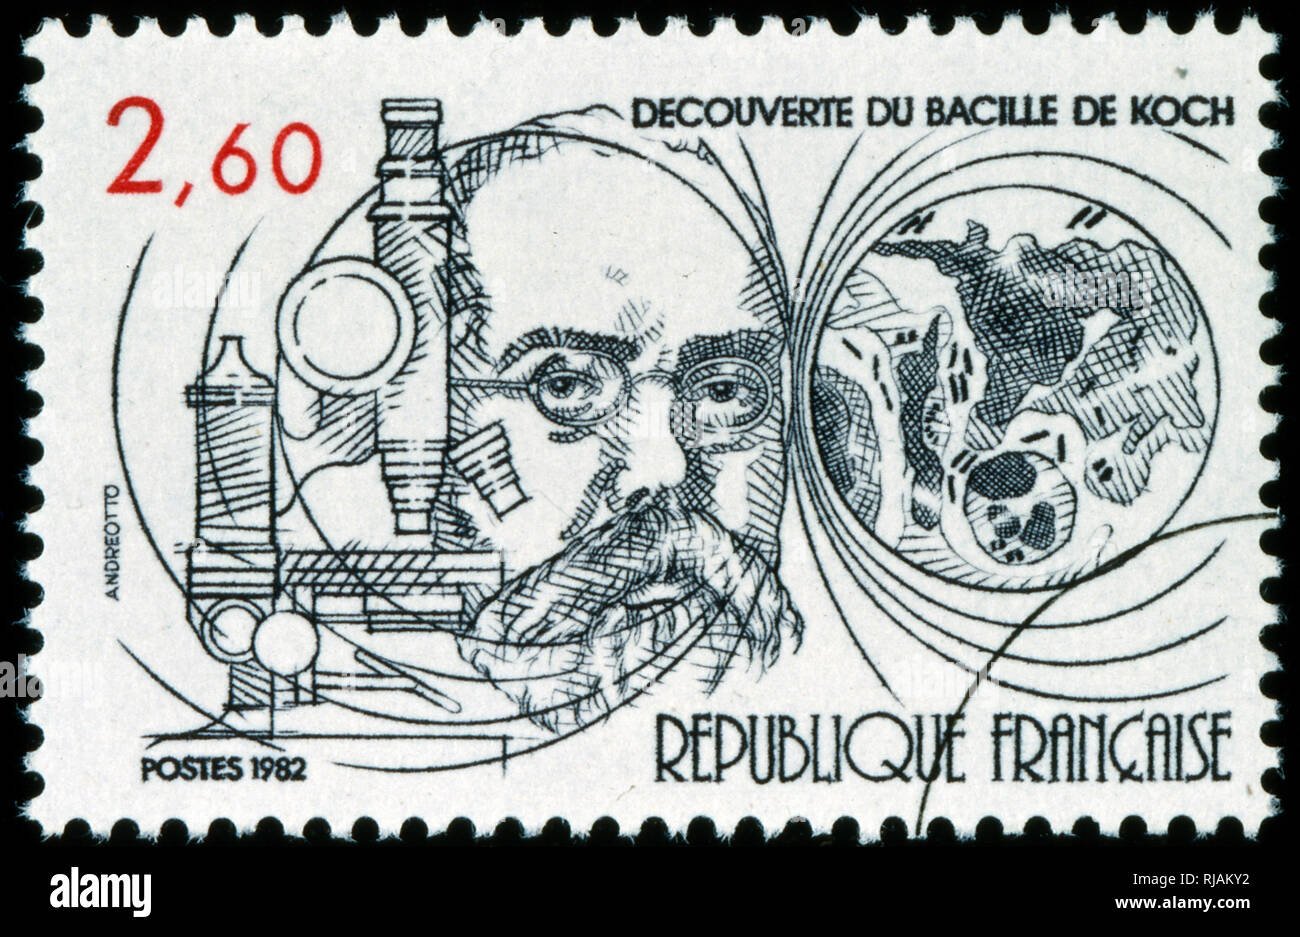 French postage stamp commemorating the work of Heinrich Hermann Robert Koch (1843 - 1910); German physician and microbiologist. As the founder of modern bacteriology, he identified the specific causative agents of tuberculosis, cholera, and anthrax and gave experimental support for the concept of infectious disease; For his research on tuberculosis, Koch received the Nobel Prize in Physiology or Medicine in 1905. Stock Photo